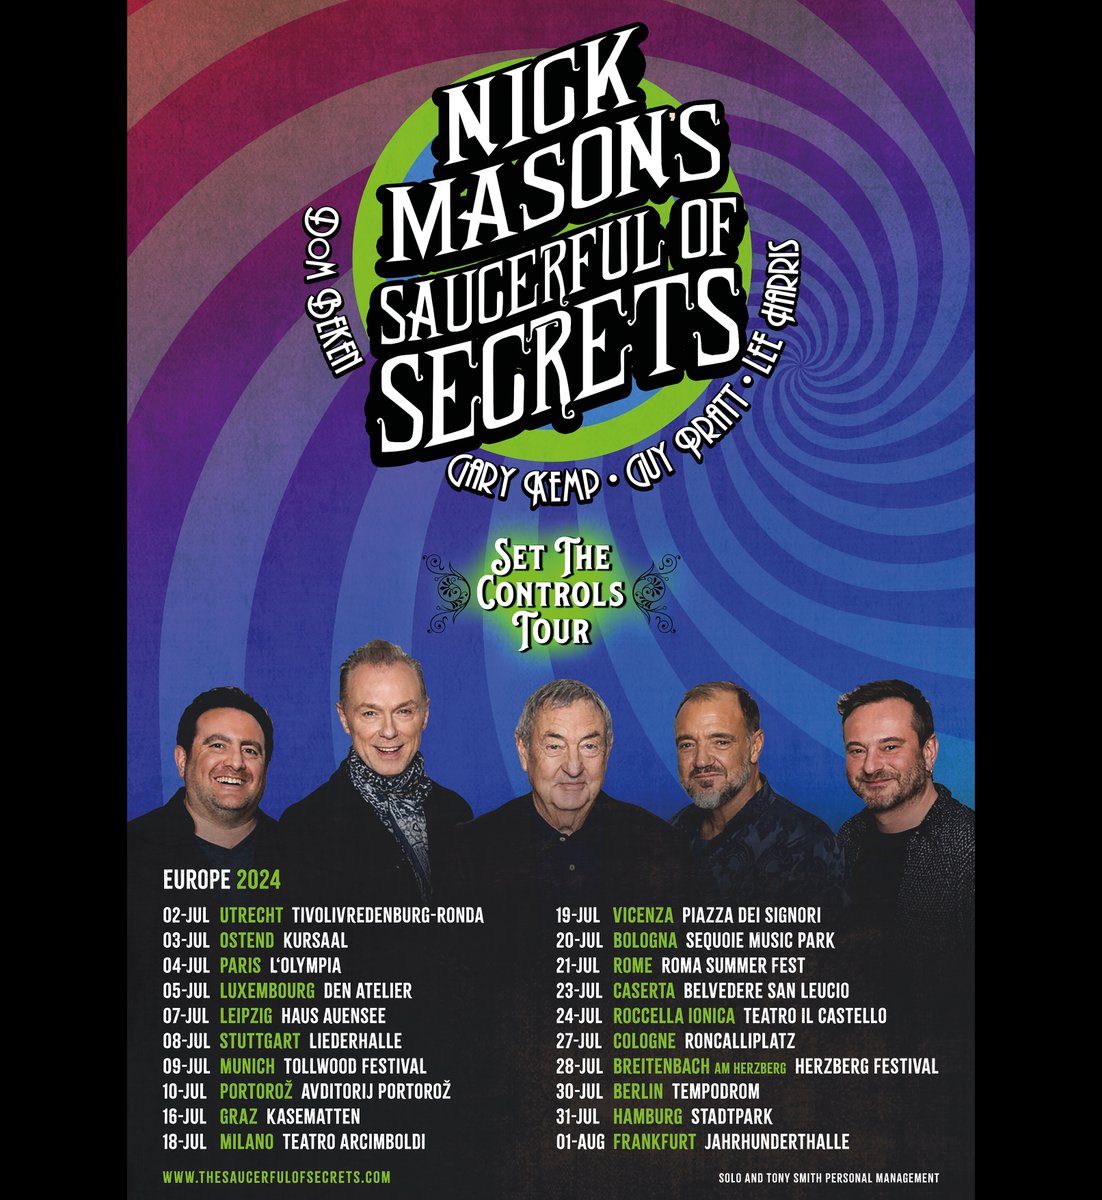 Not long now! Two weeks today, Nick Mason's Saucerful Of Secrets will be starting their 2024 Set The Controls tour in Stoke, England. Who's coming to see the band, and where?